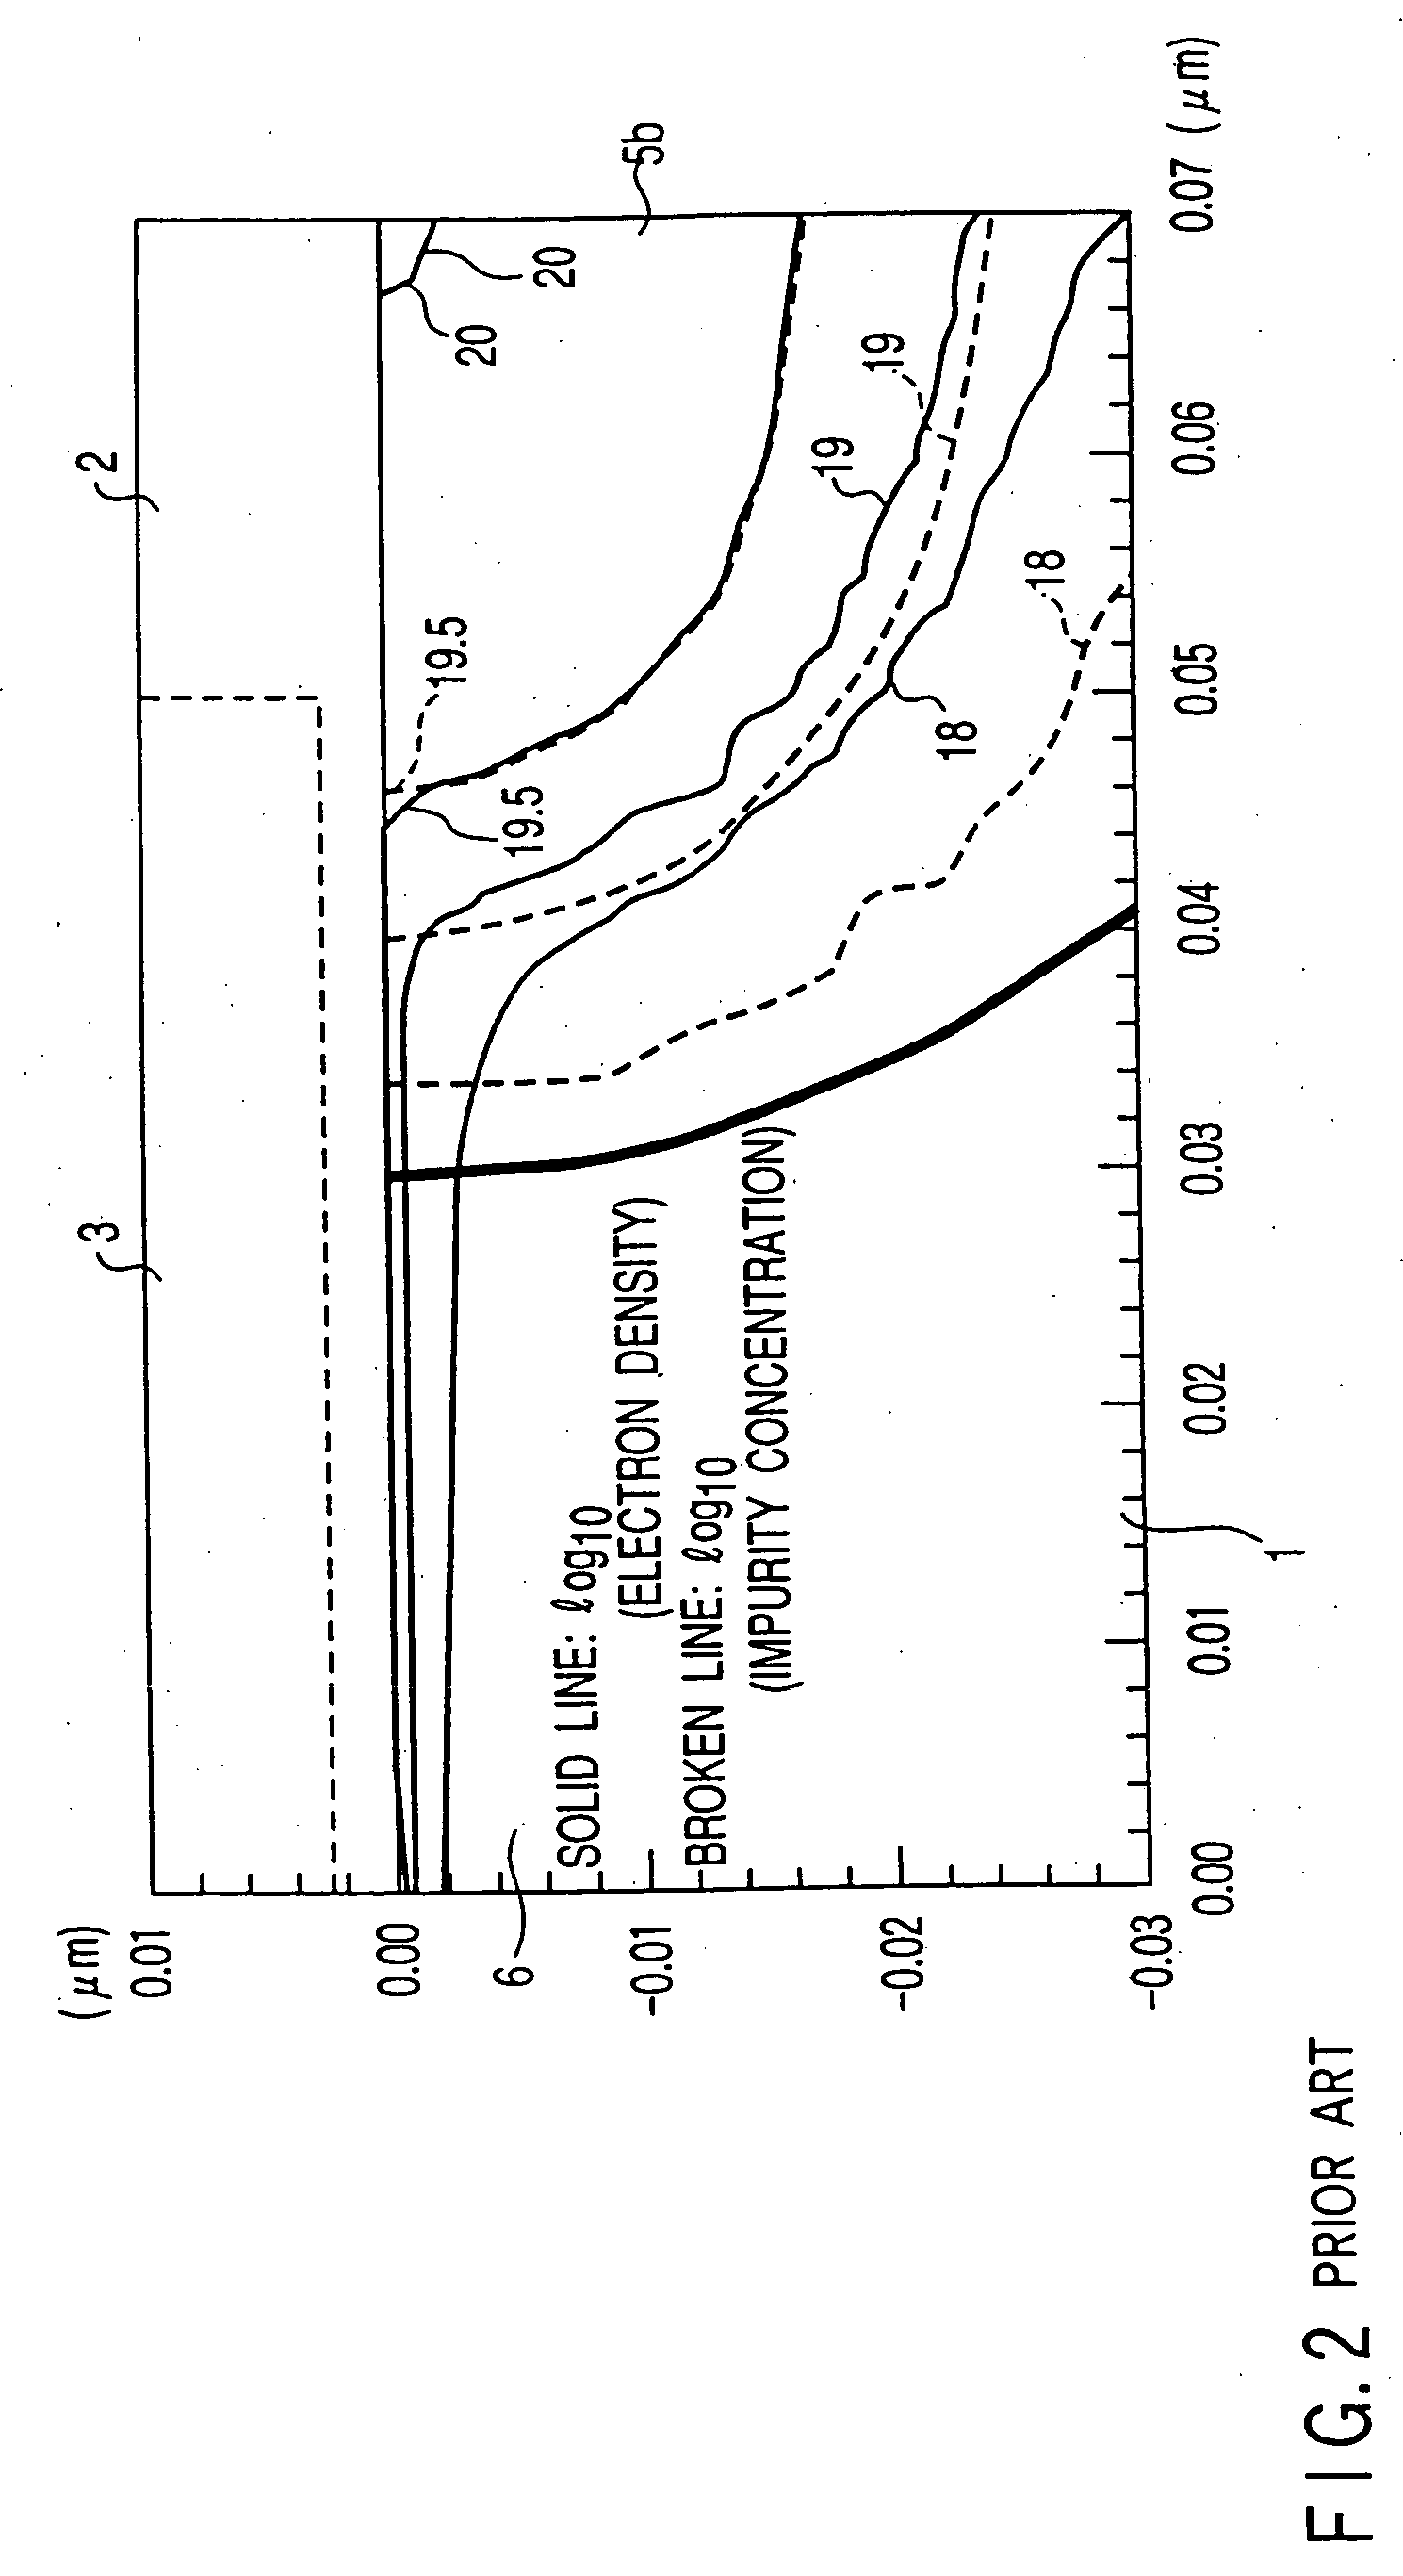 MIS semiconductor device and method of fabricating the same